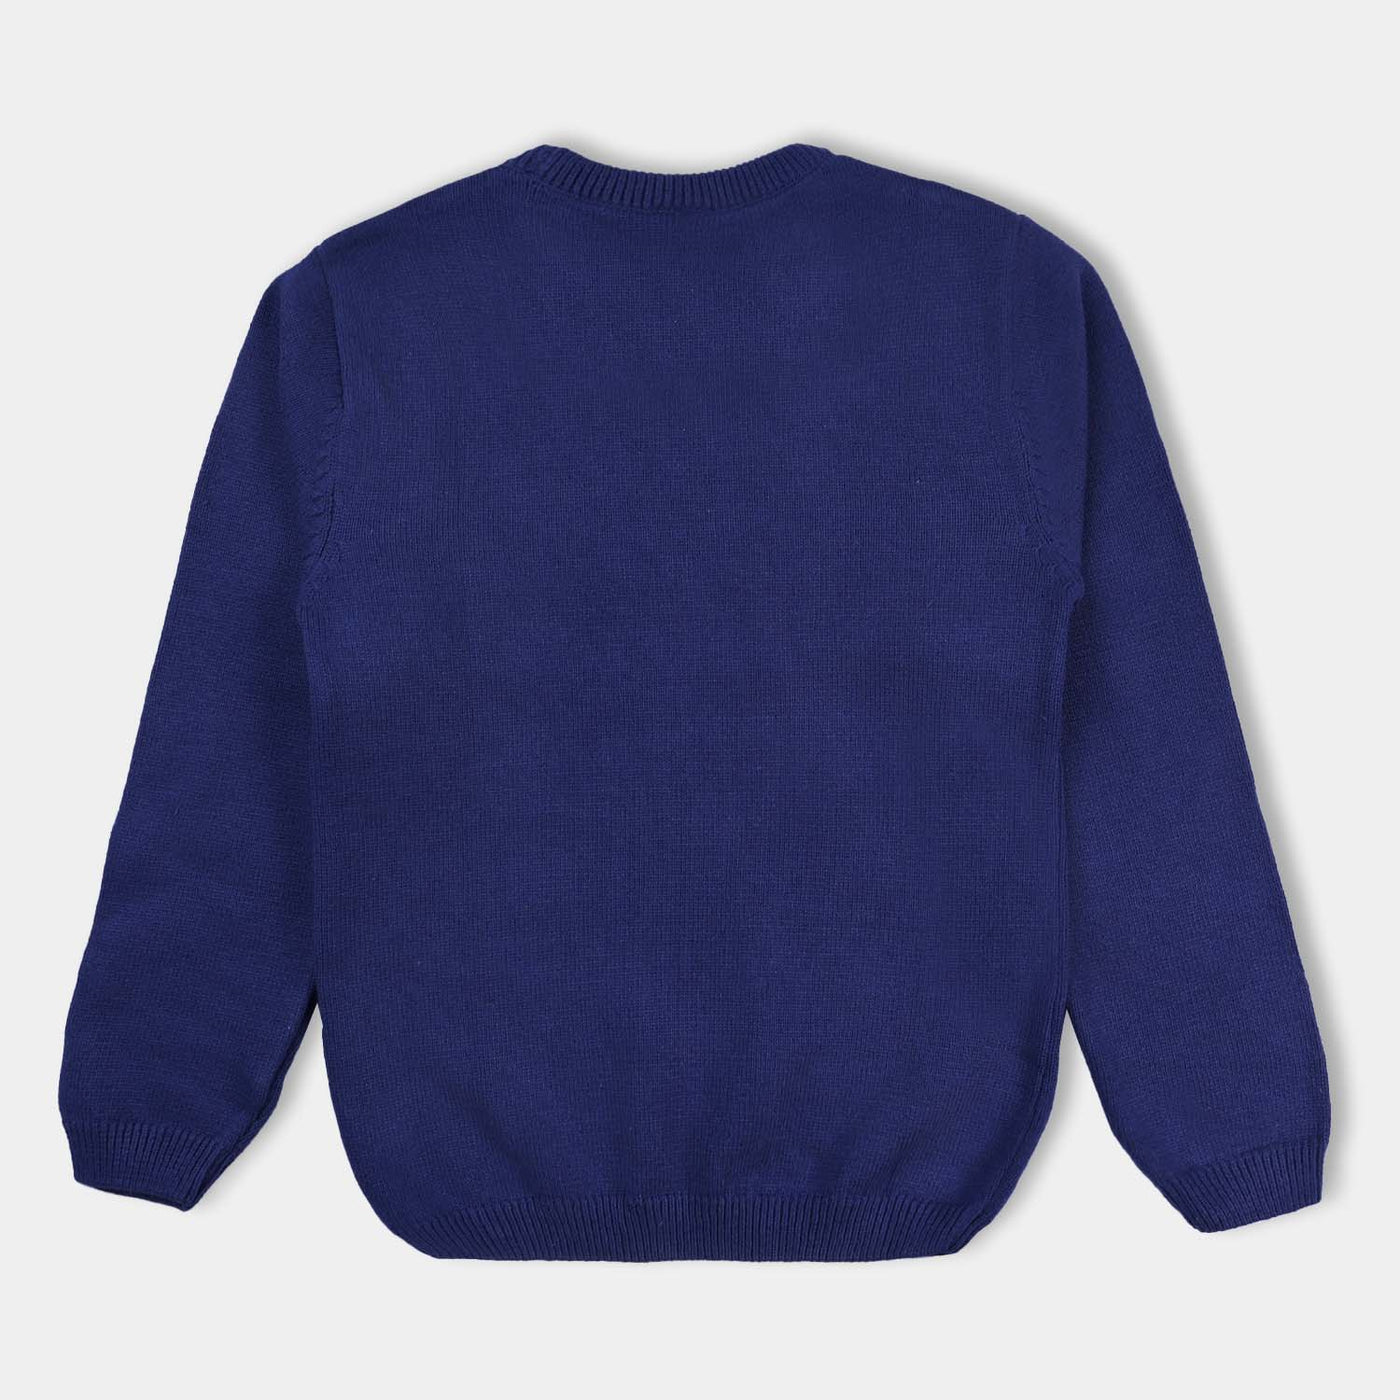 Girls Cotton Full Sleeves Sweater Sequence - Navy